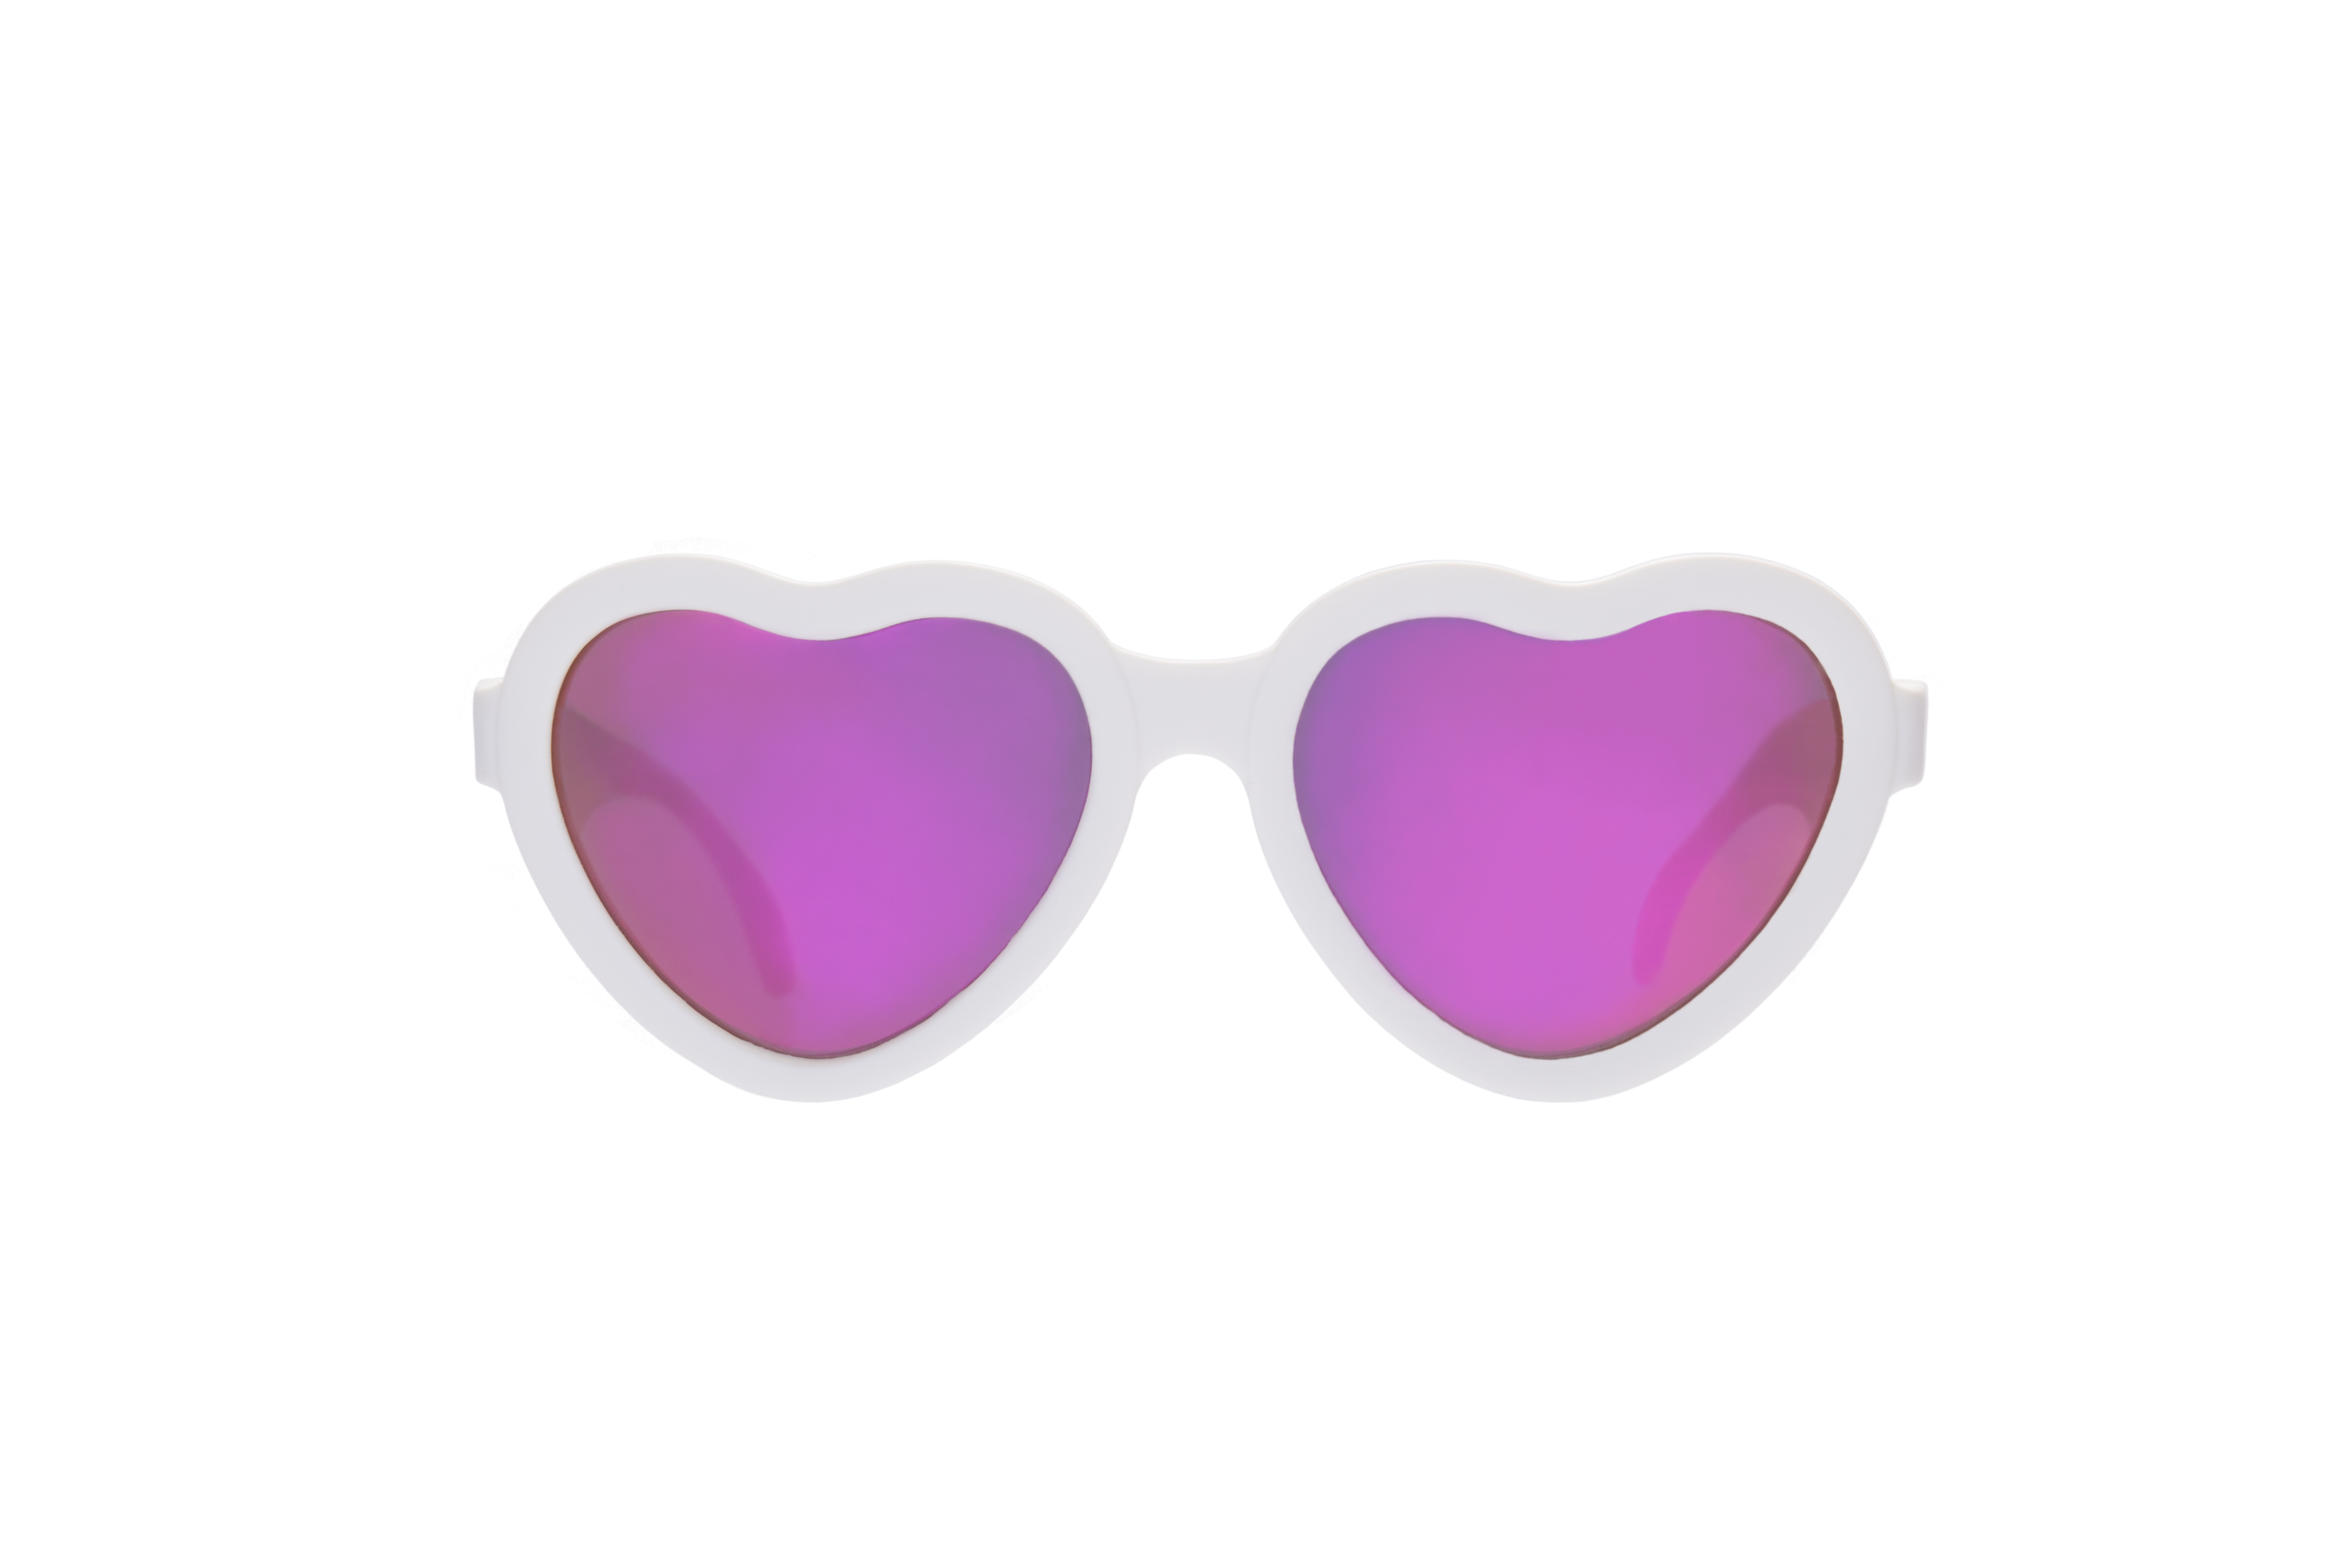 Babiators - Polarized Heart Sunglasses: Ages 6+ / Frosted Pink